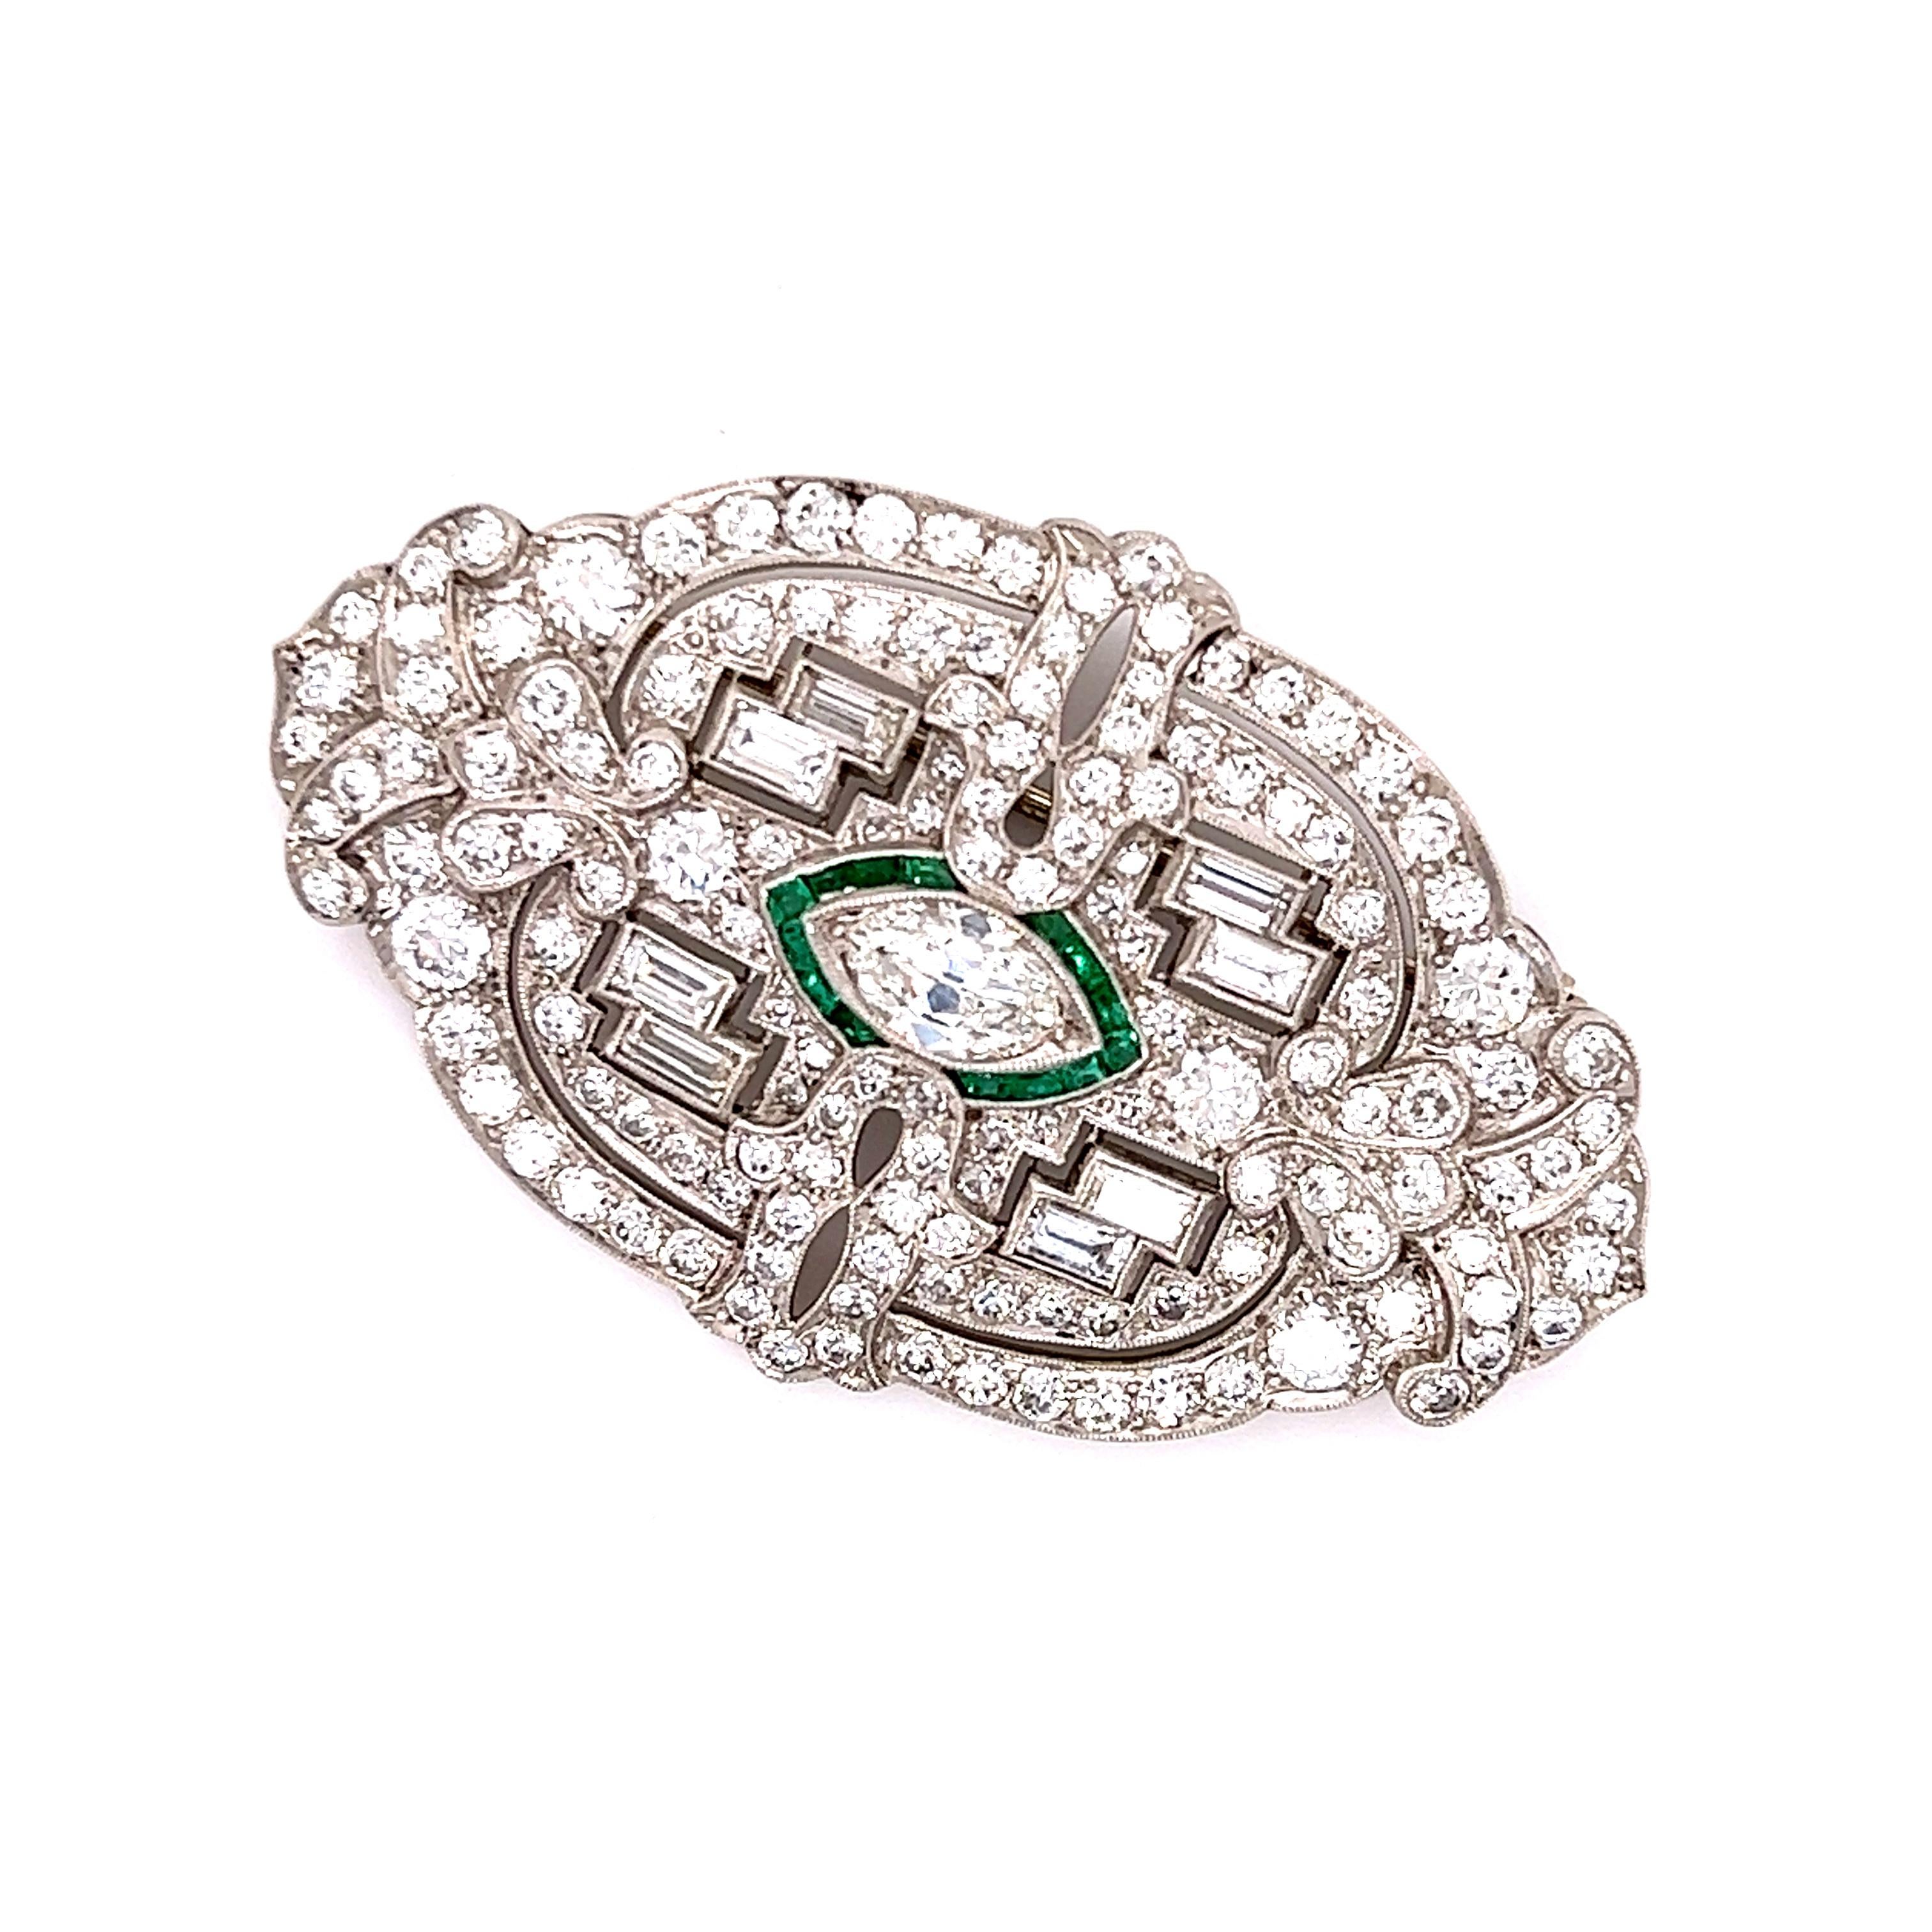 Exquisite detail is seen on this Art Deco treasure. Crafted in platinum this brooch is sure to stand out whenever worn.  Highlighting the brooch is one east/west set old European cut marquise shaped diamond. The diamond is surrounded by emerald